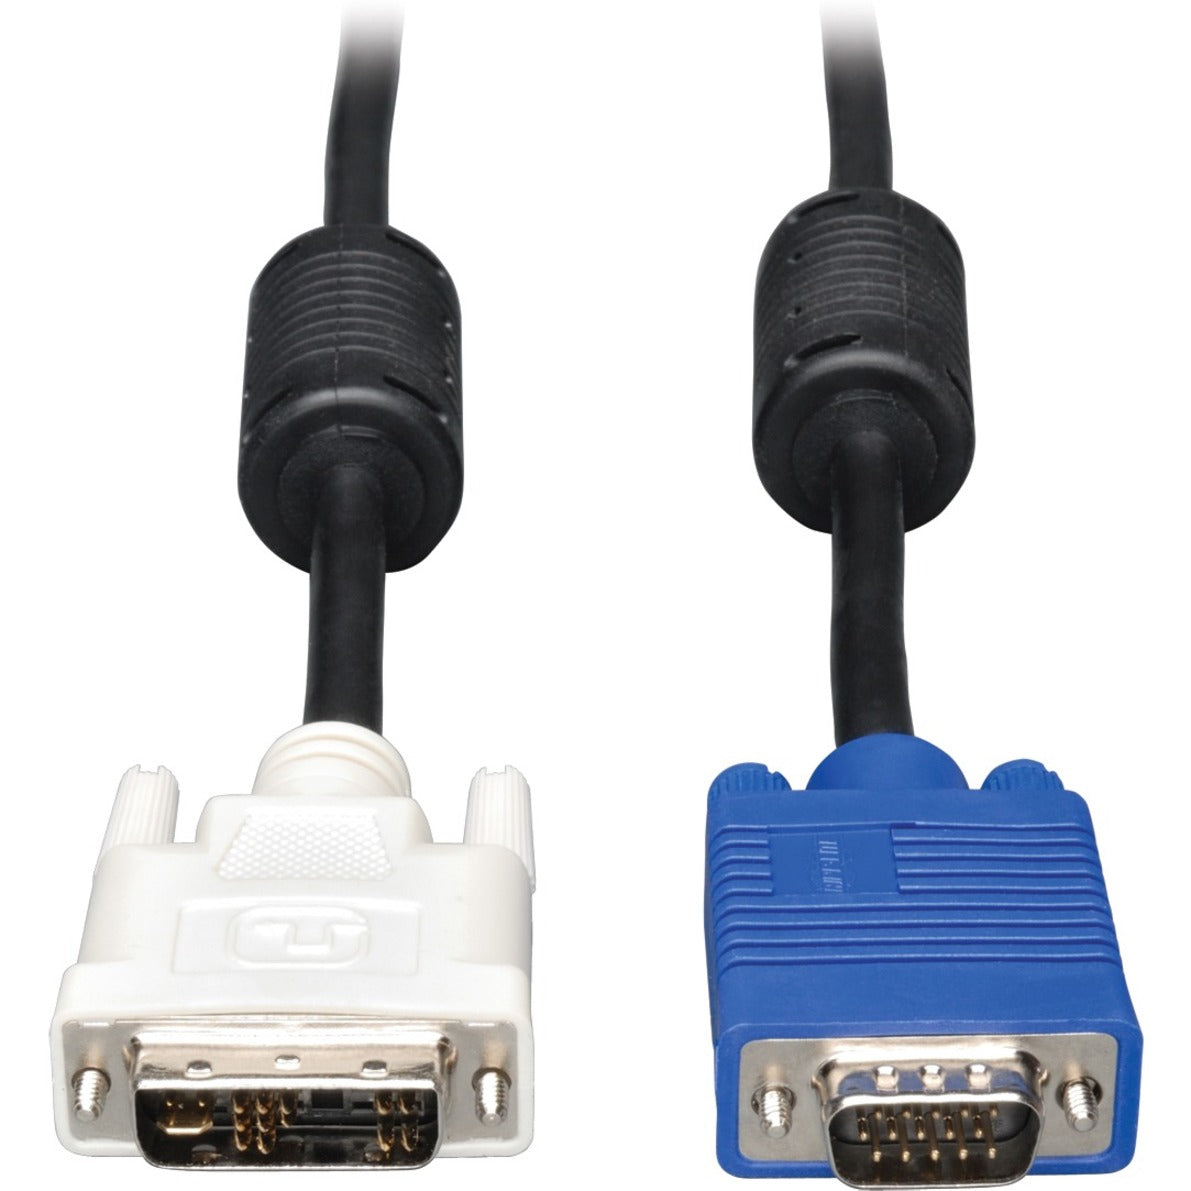 Tripp Lite P556-003 Coaxial DVI/VGA Cable, 3 ft, Molded, Strain Relief, EMI/RF Protection, Gold Plated Connectors